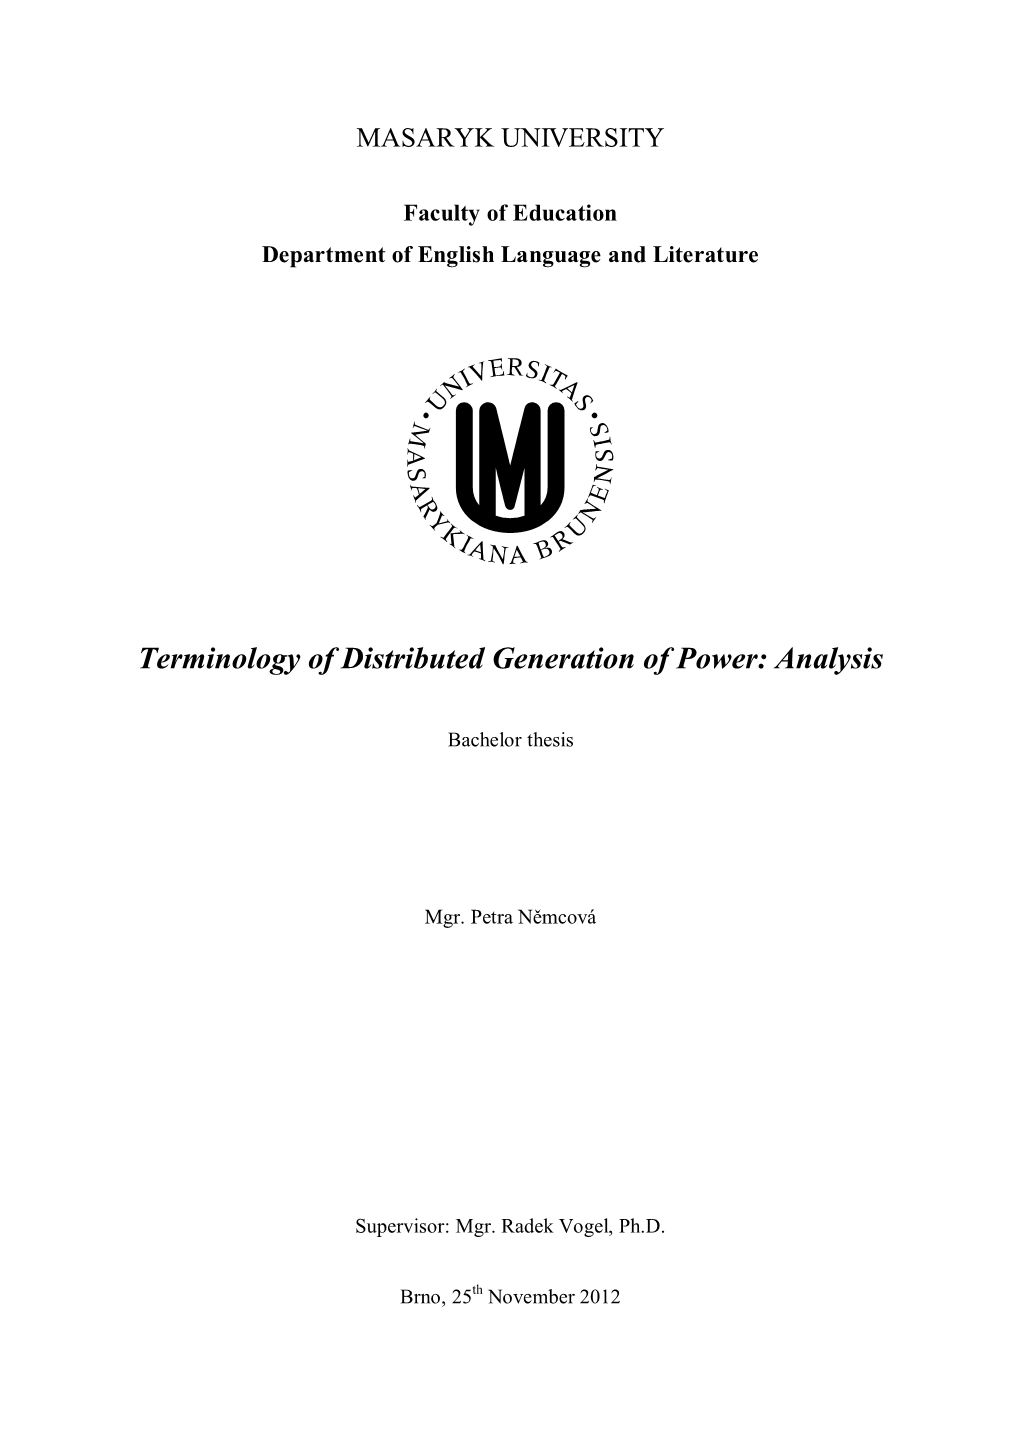 Terminology of Distributed Generation of Power: Analysis